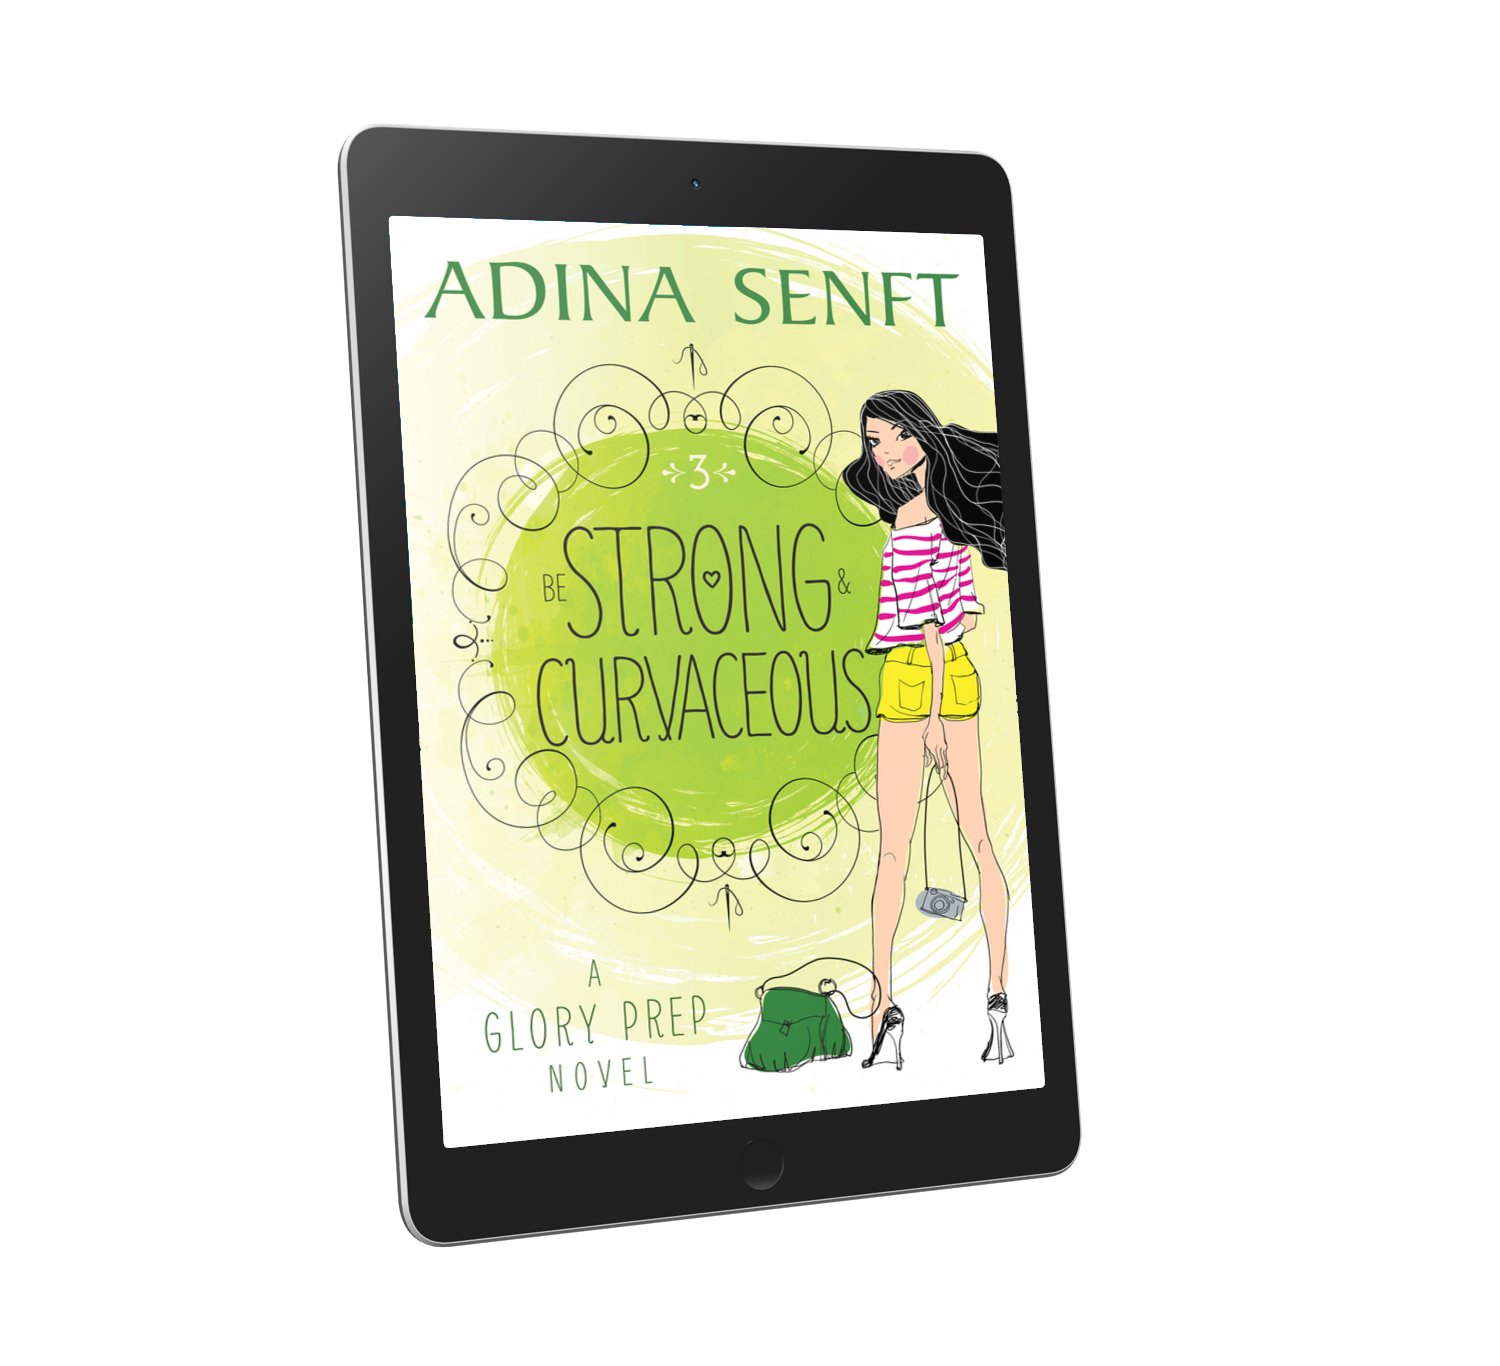 Be Strong and Curvaceous by Adina Senft, a YA novel of friendship, fashion and faith